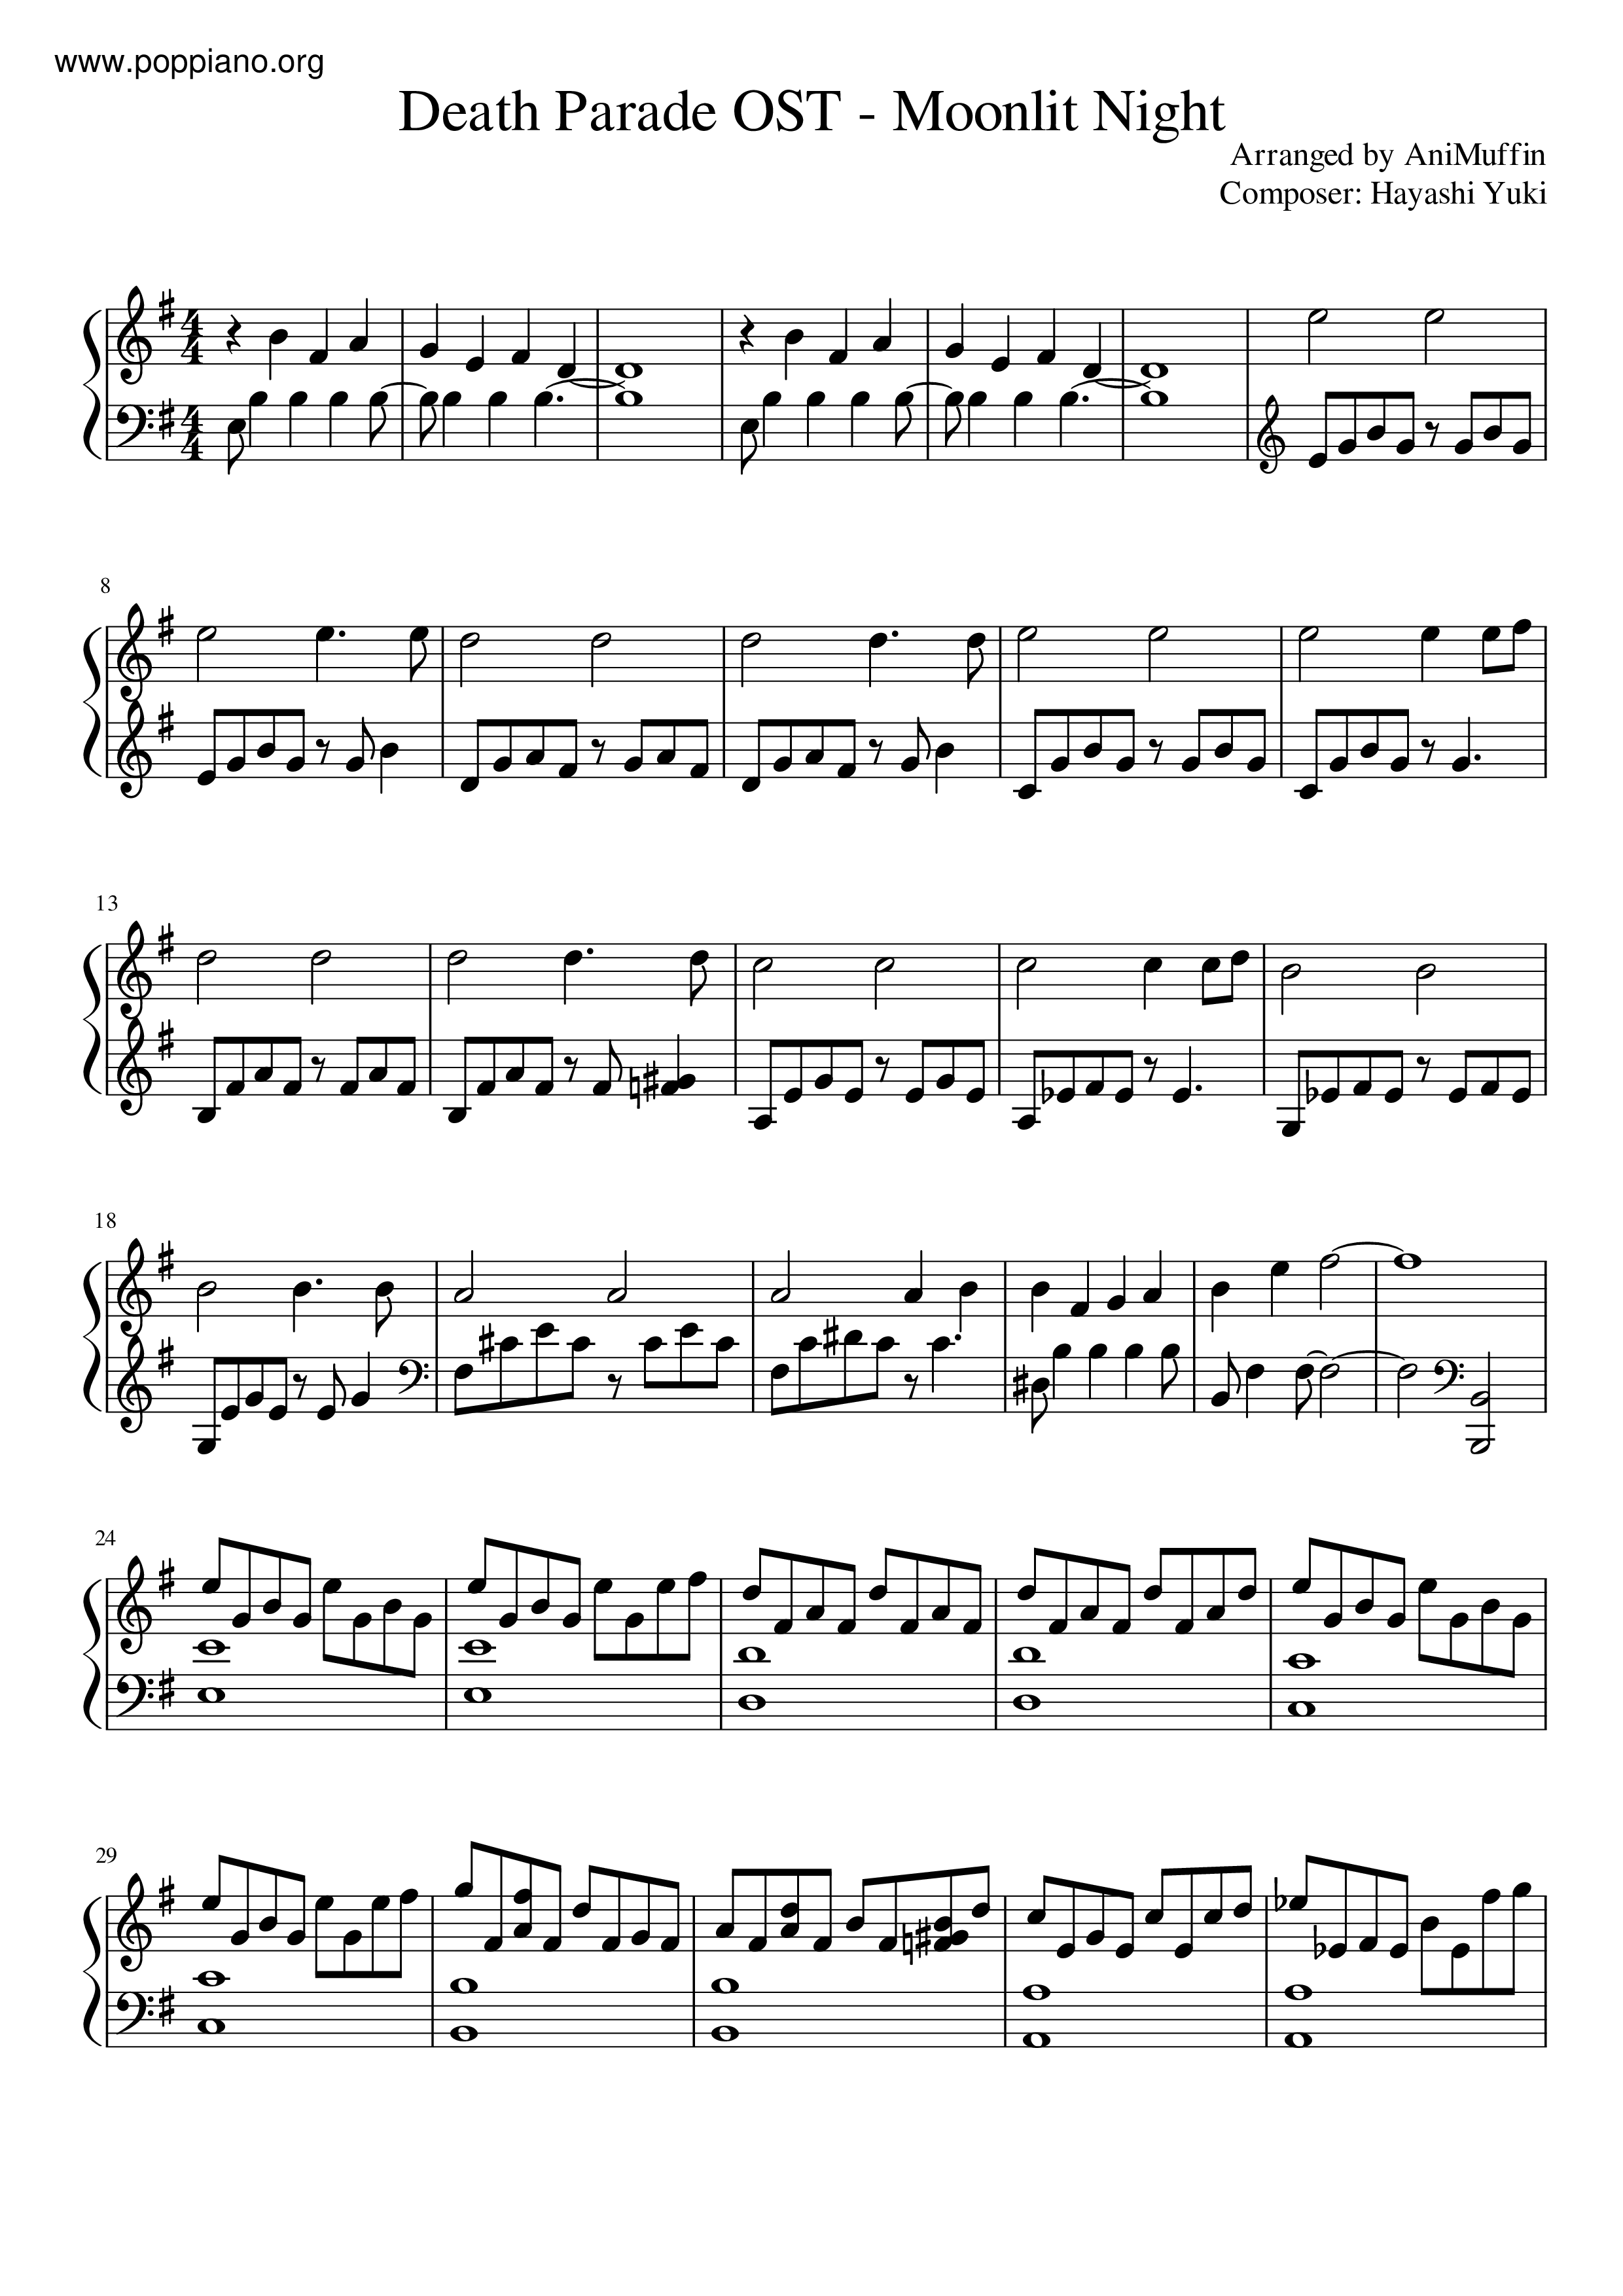  animeDaily Life Of Male High School StudentsLiterary Girl Sheet Music  pdf アニメソング  Free Score Download 